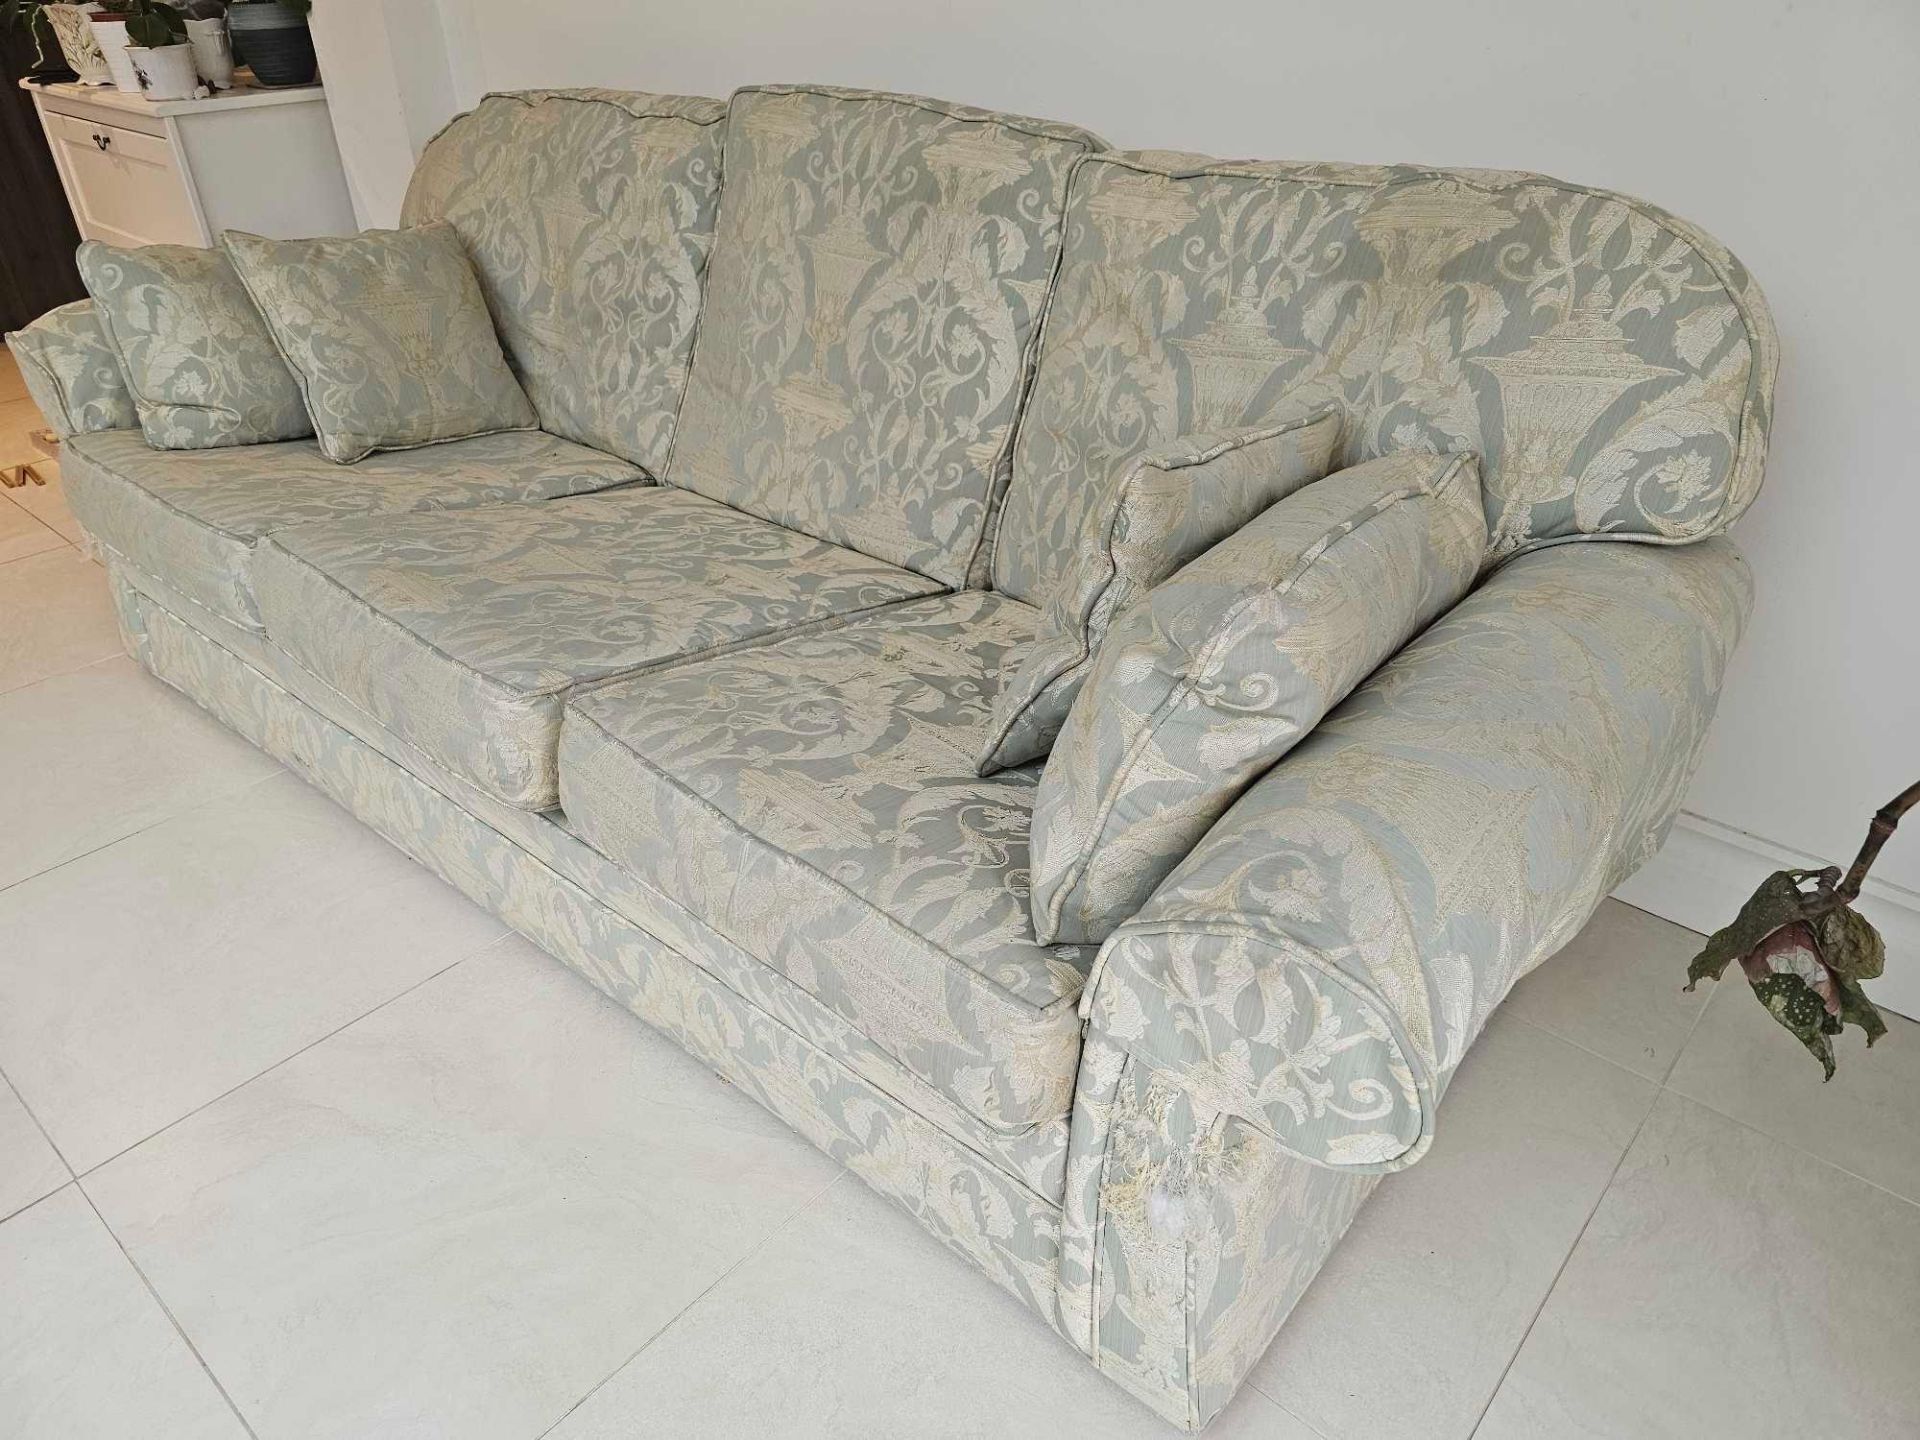 A Peter Guild Upholstered Three Seater Sofa In Damask Embossed Pattern Mint And Gold 235 X 87 X 95cm - Image 4 of 7